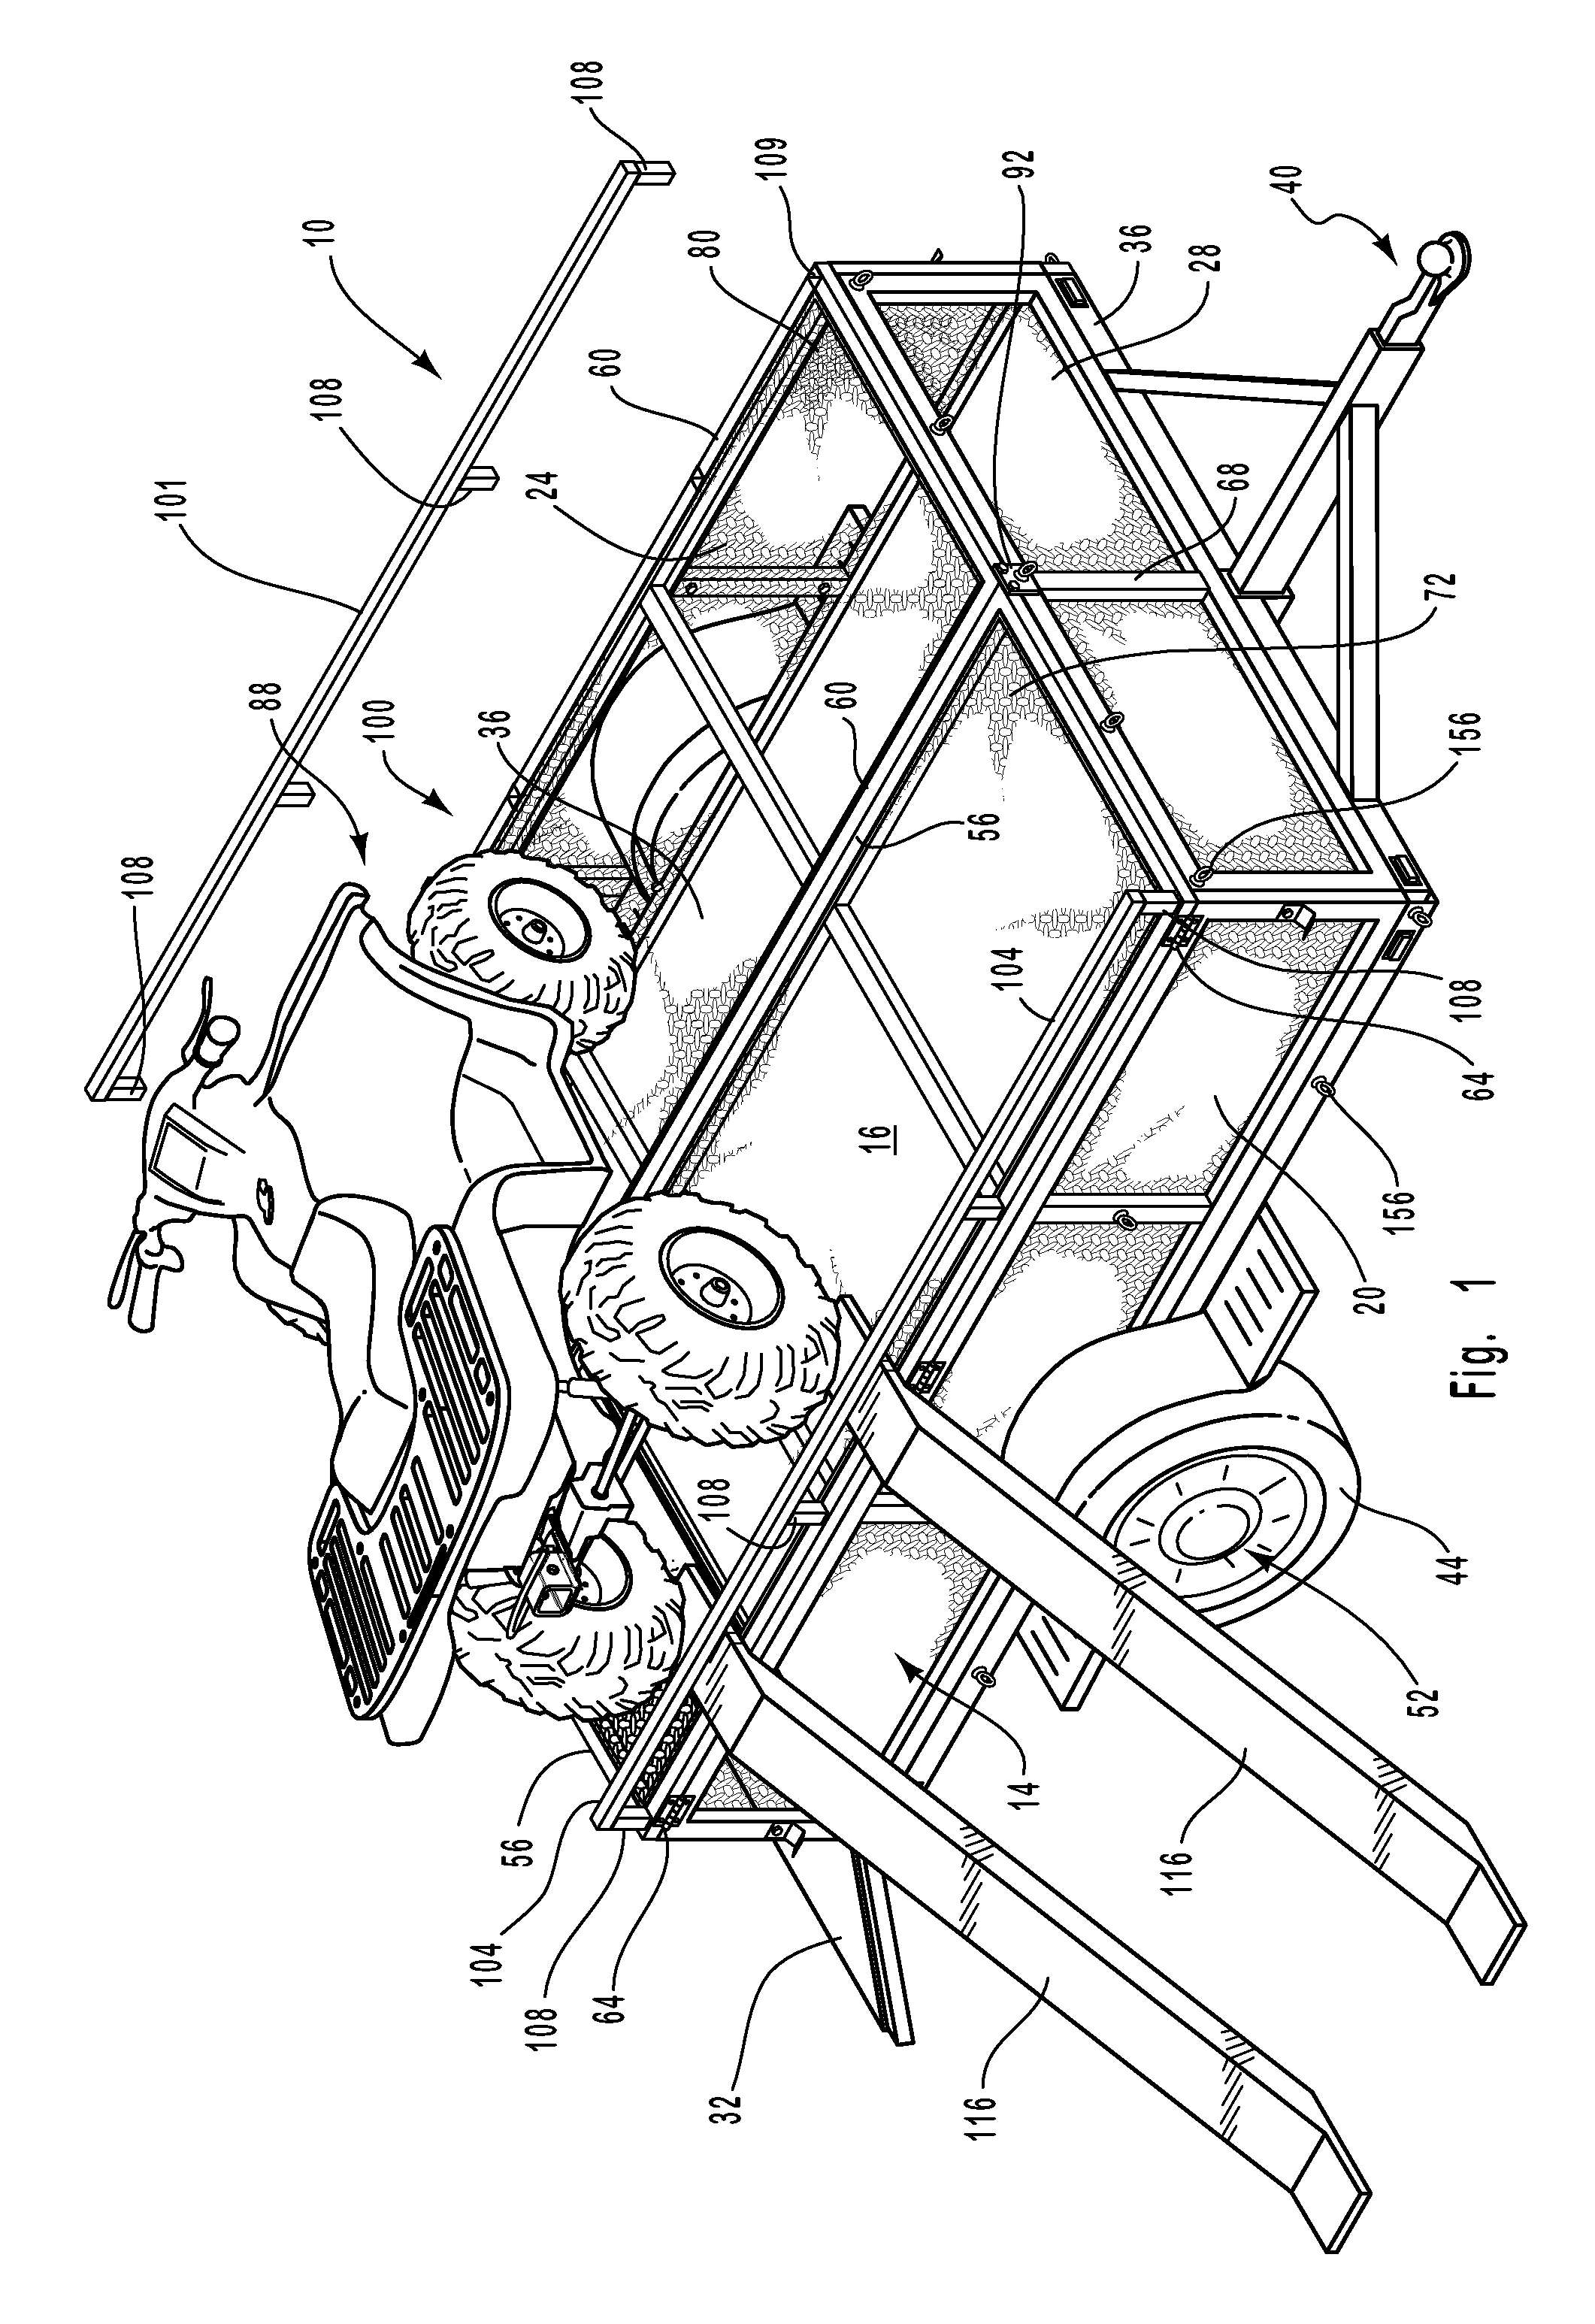 Tent assembly for use with utility trailers and vehicles